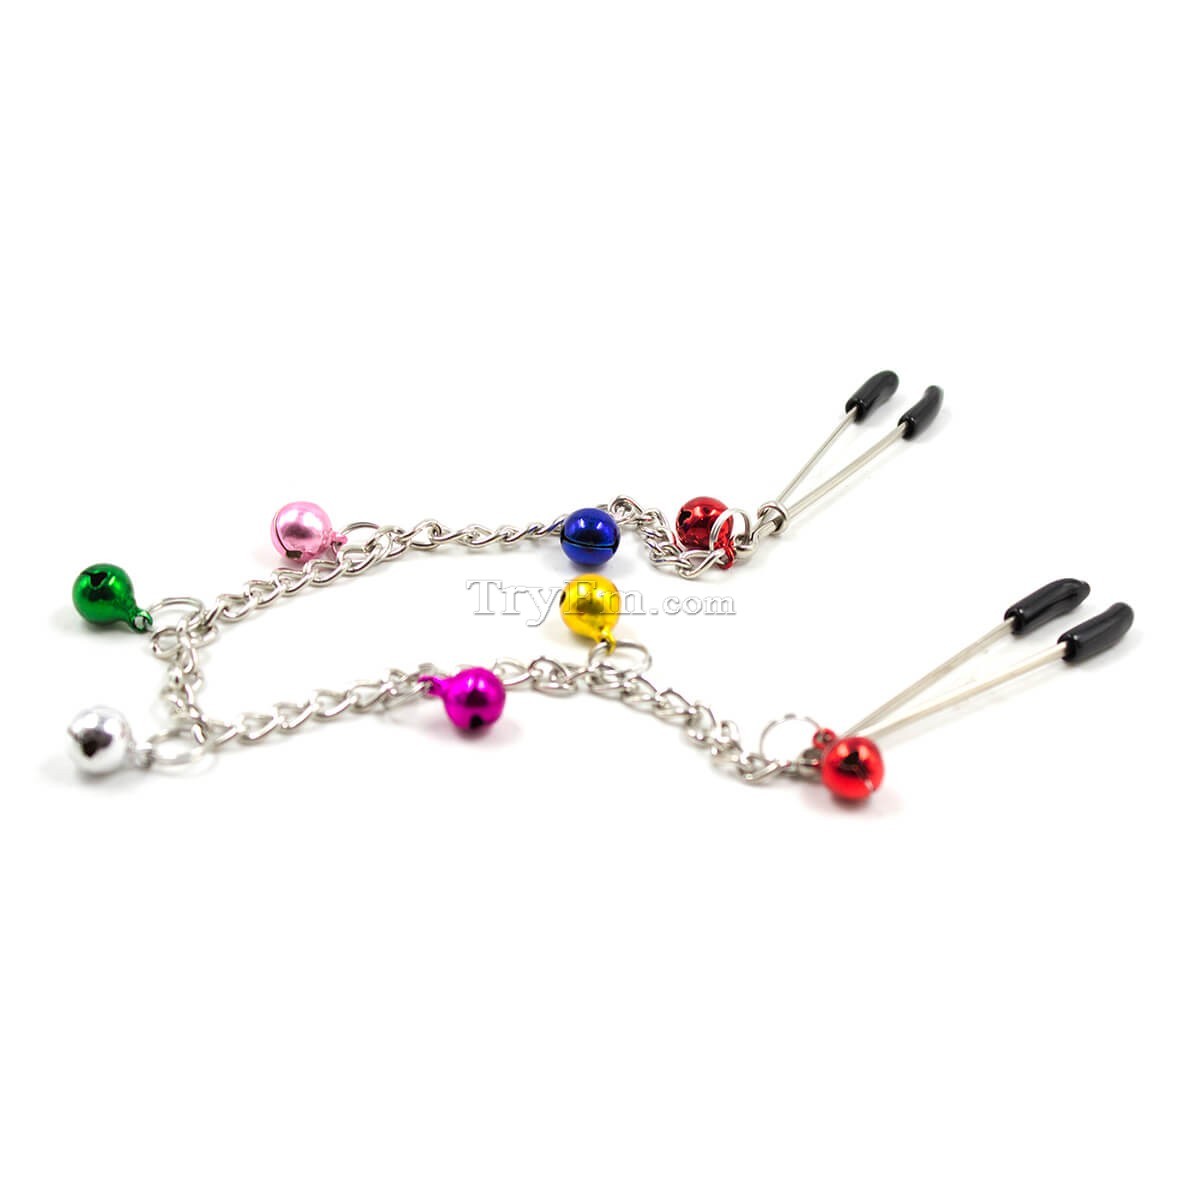 10-nipple-clamp-with-colorful-bells2.jpg